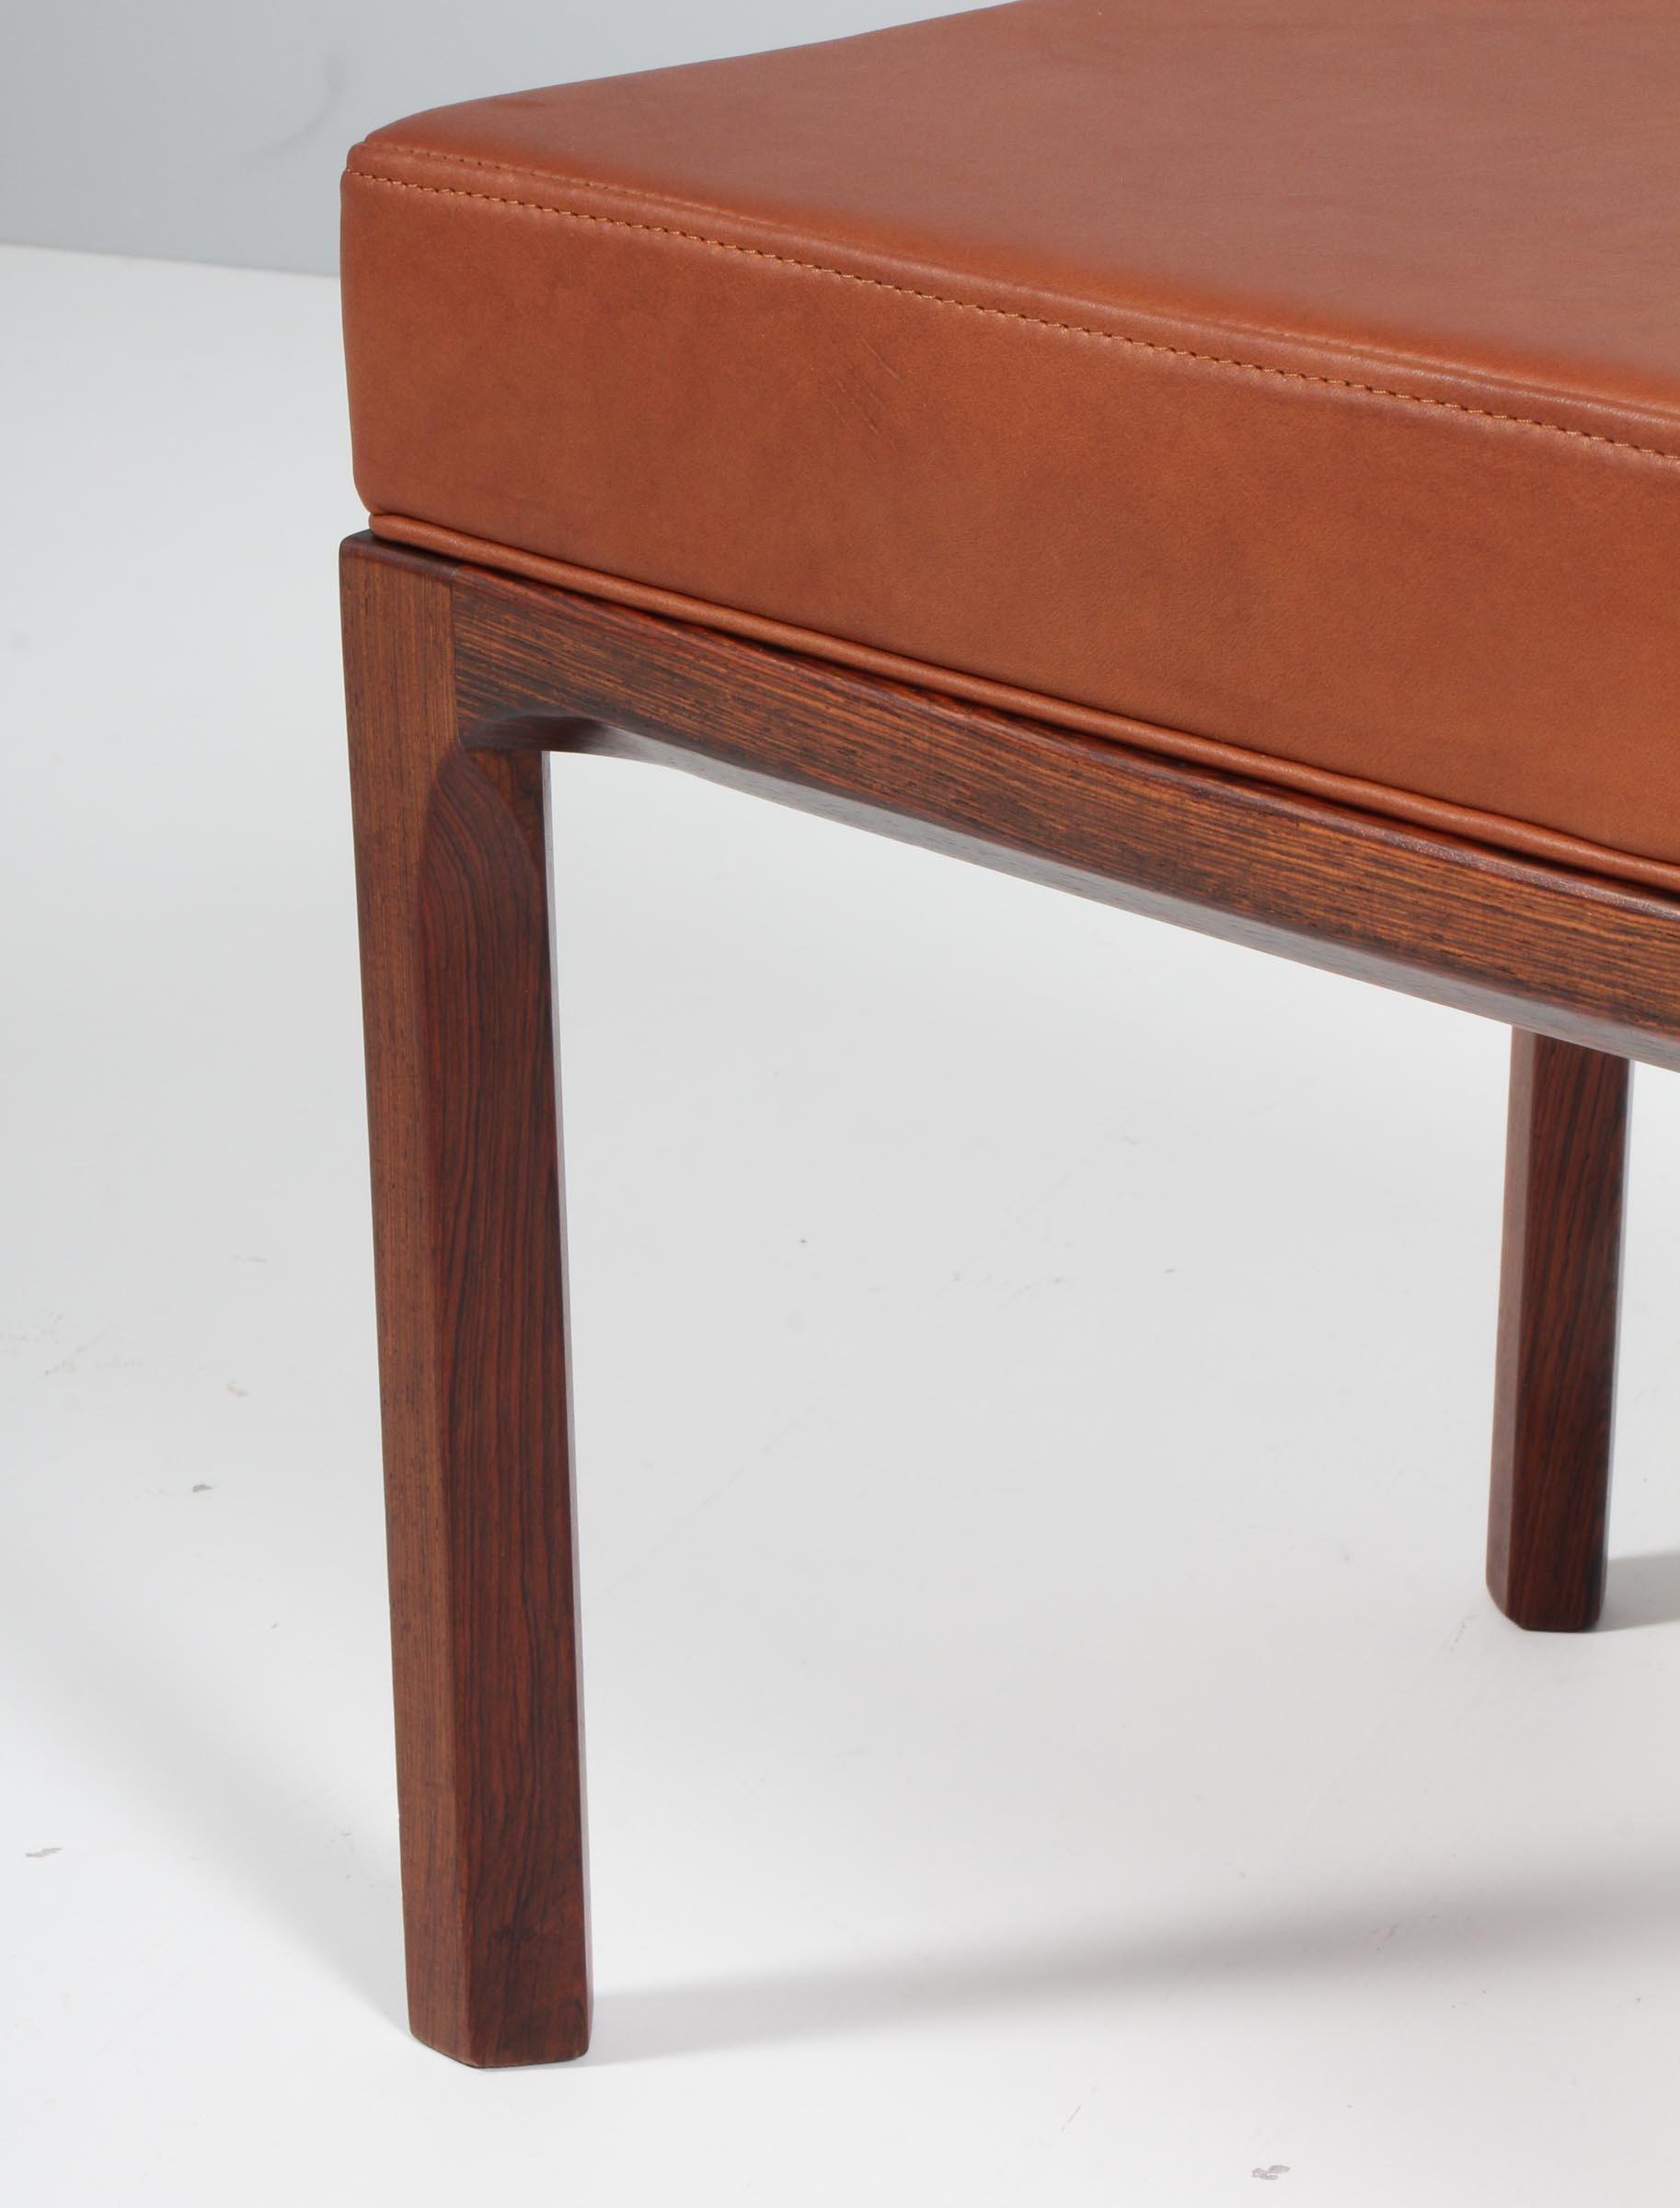 Kai Kristiansen for Aksel Kjersgaard, stool with leather and rosewood In Excellent Condition For Sale In Esbjerg, DK